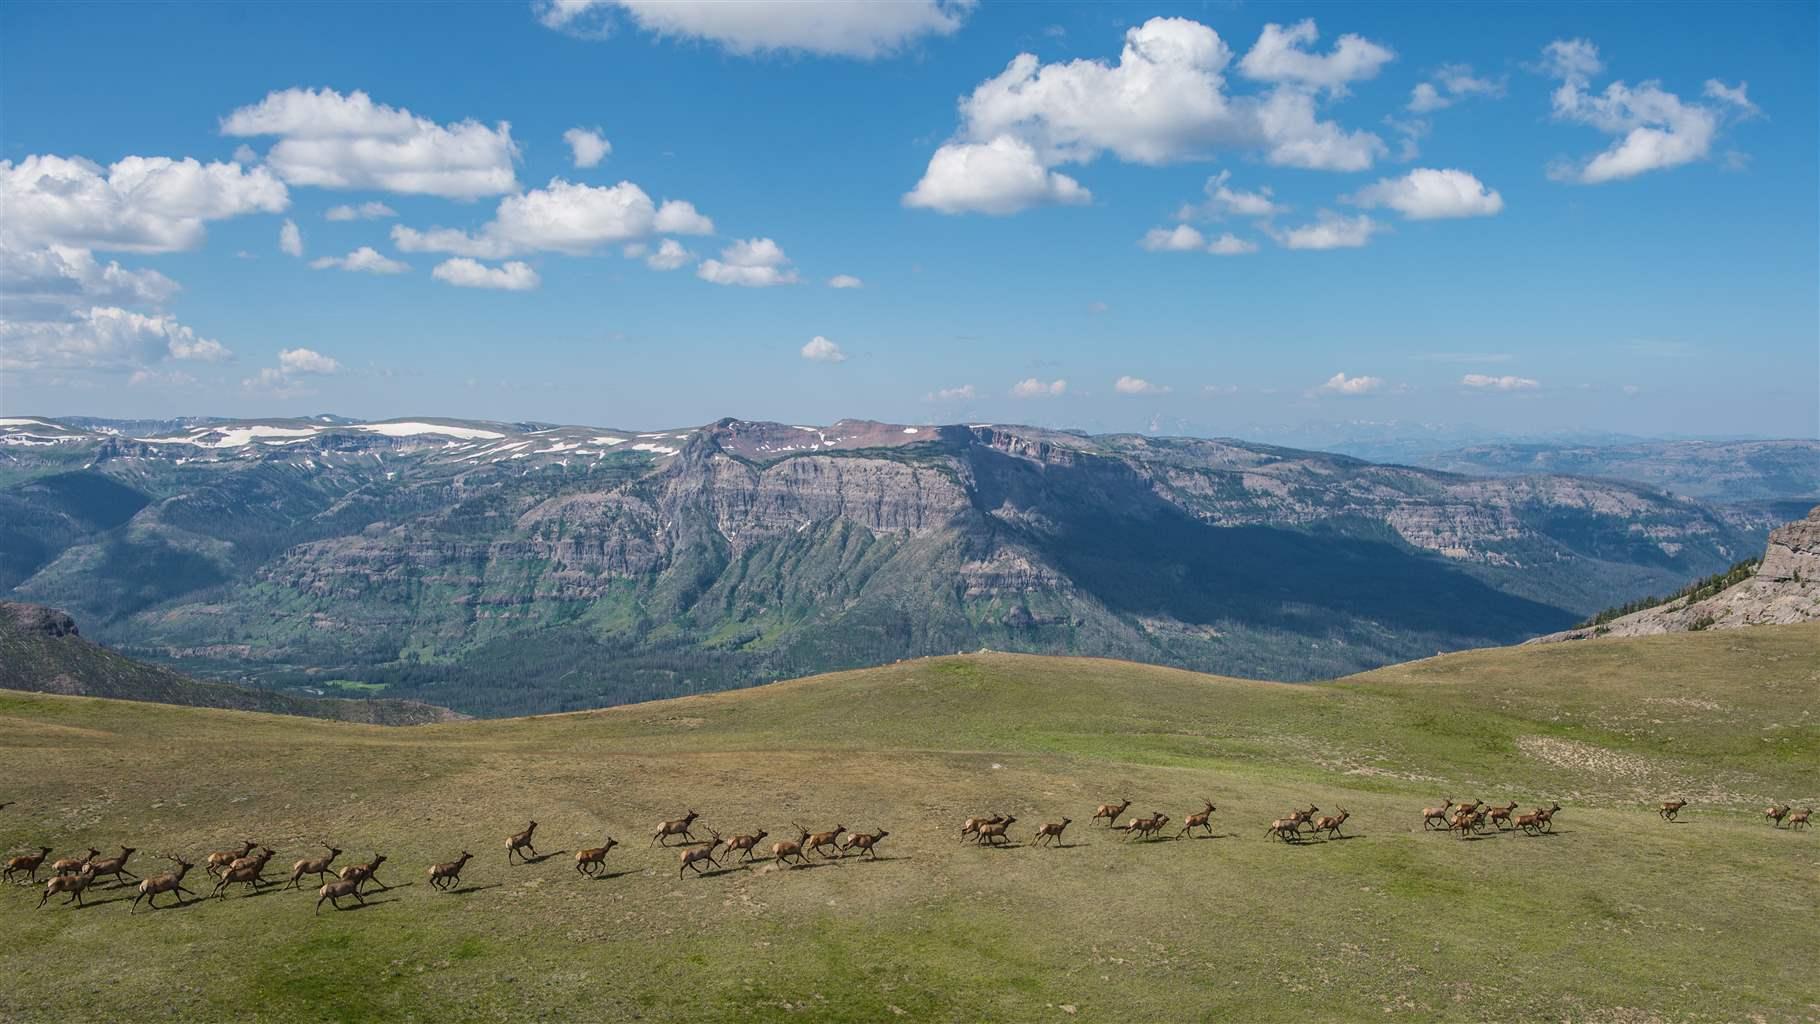 A herd of elk runs across a grassy plateau in front of a snow-covered mountain range and below a blue sky with scattered puffy white clouds.